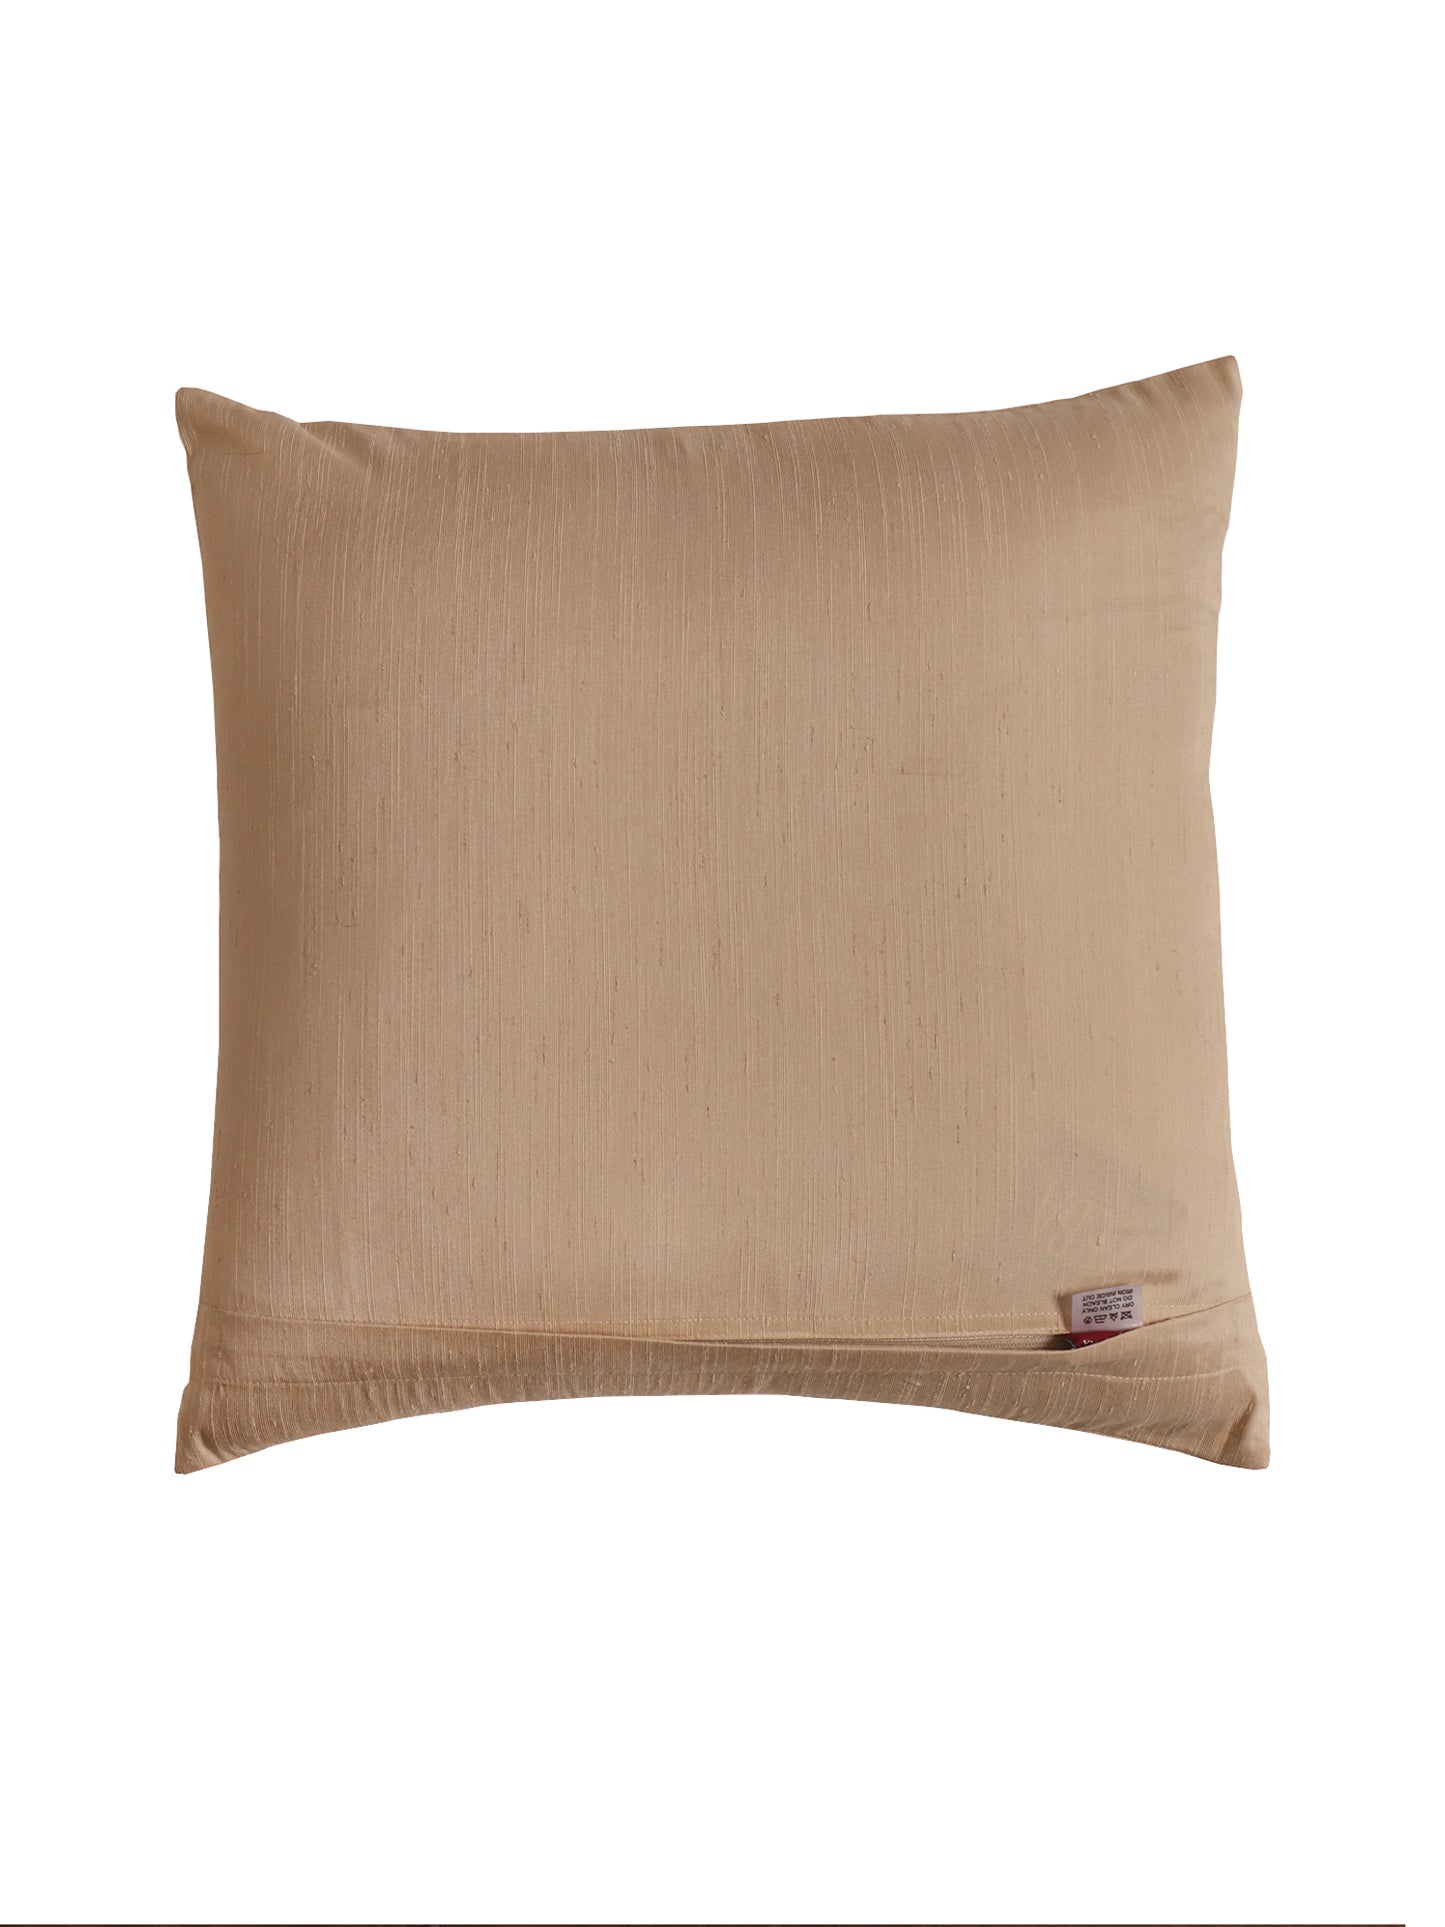 Cushion Cover Polyester Blend Concentric Embroidery Cream - 16" x 16"